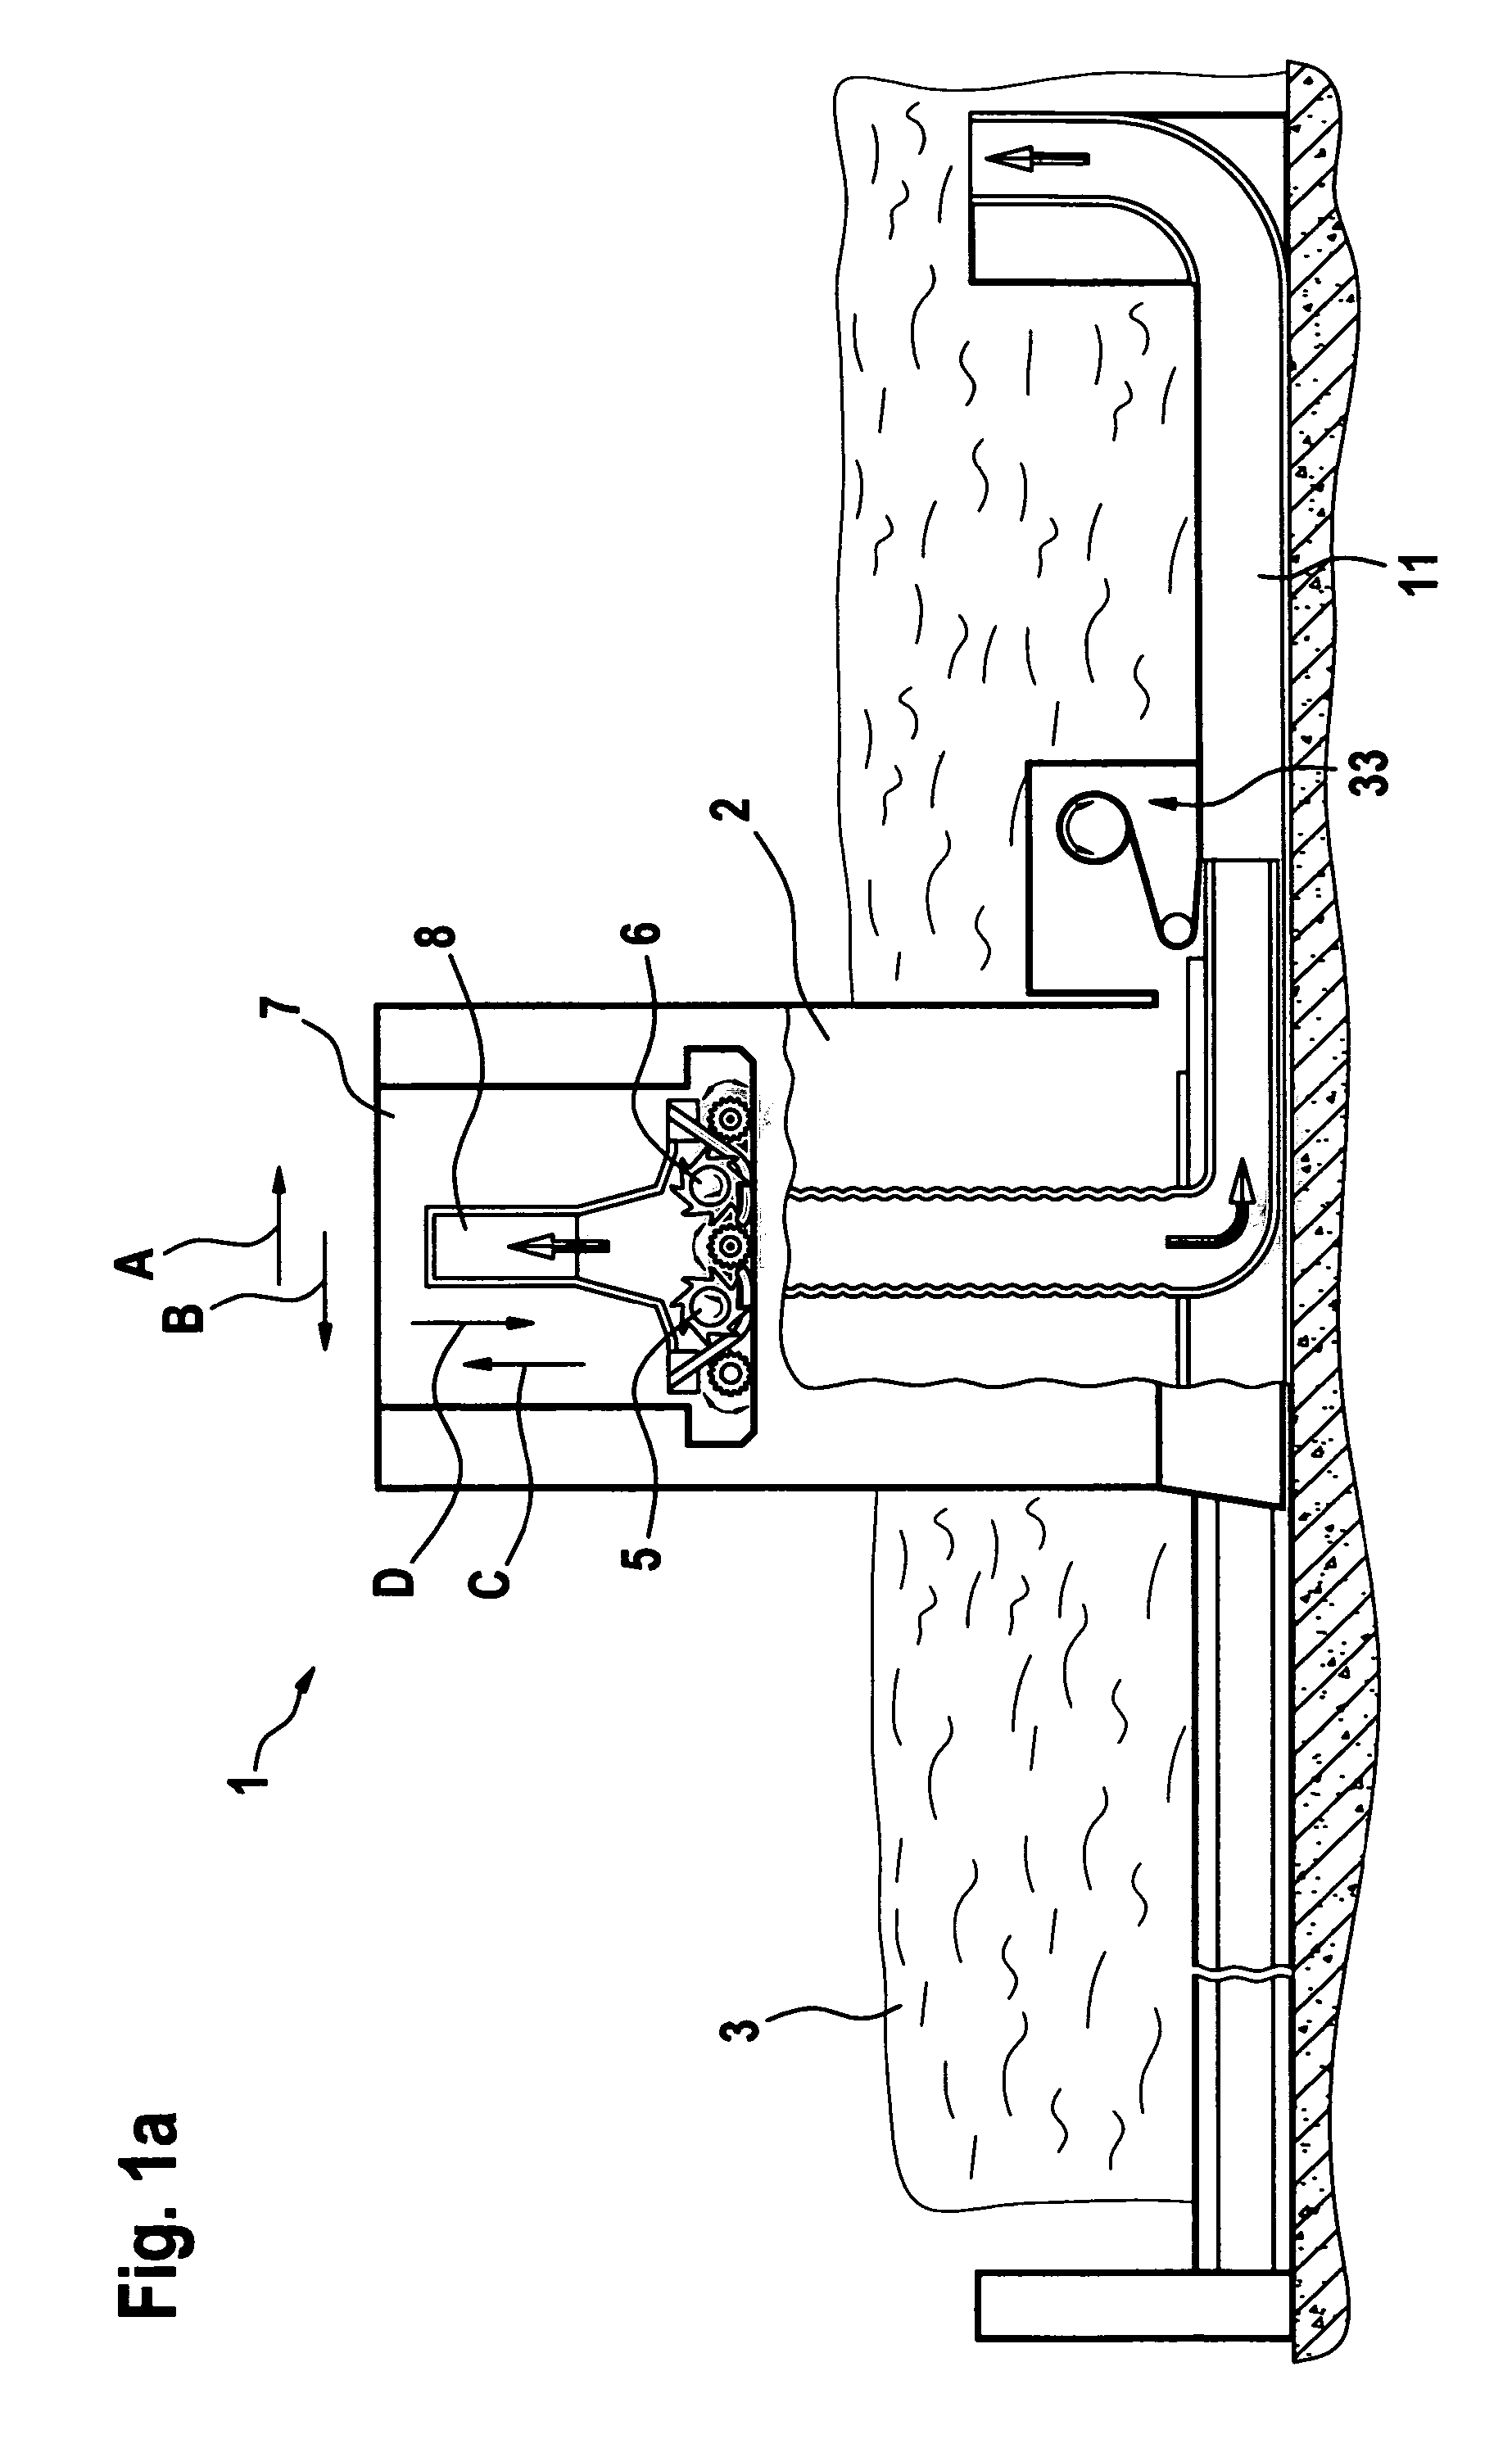 Apparatus for stripping fibre material from textile fibre bales of spinning material, for example cotton, synthetic fibres and the like